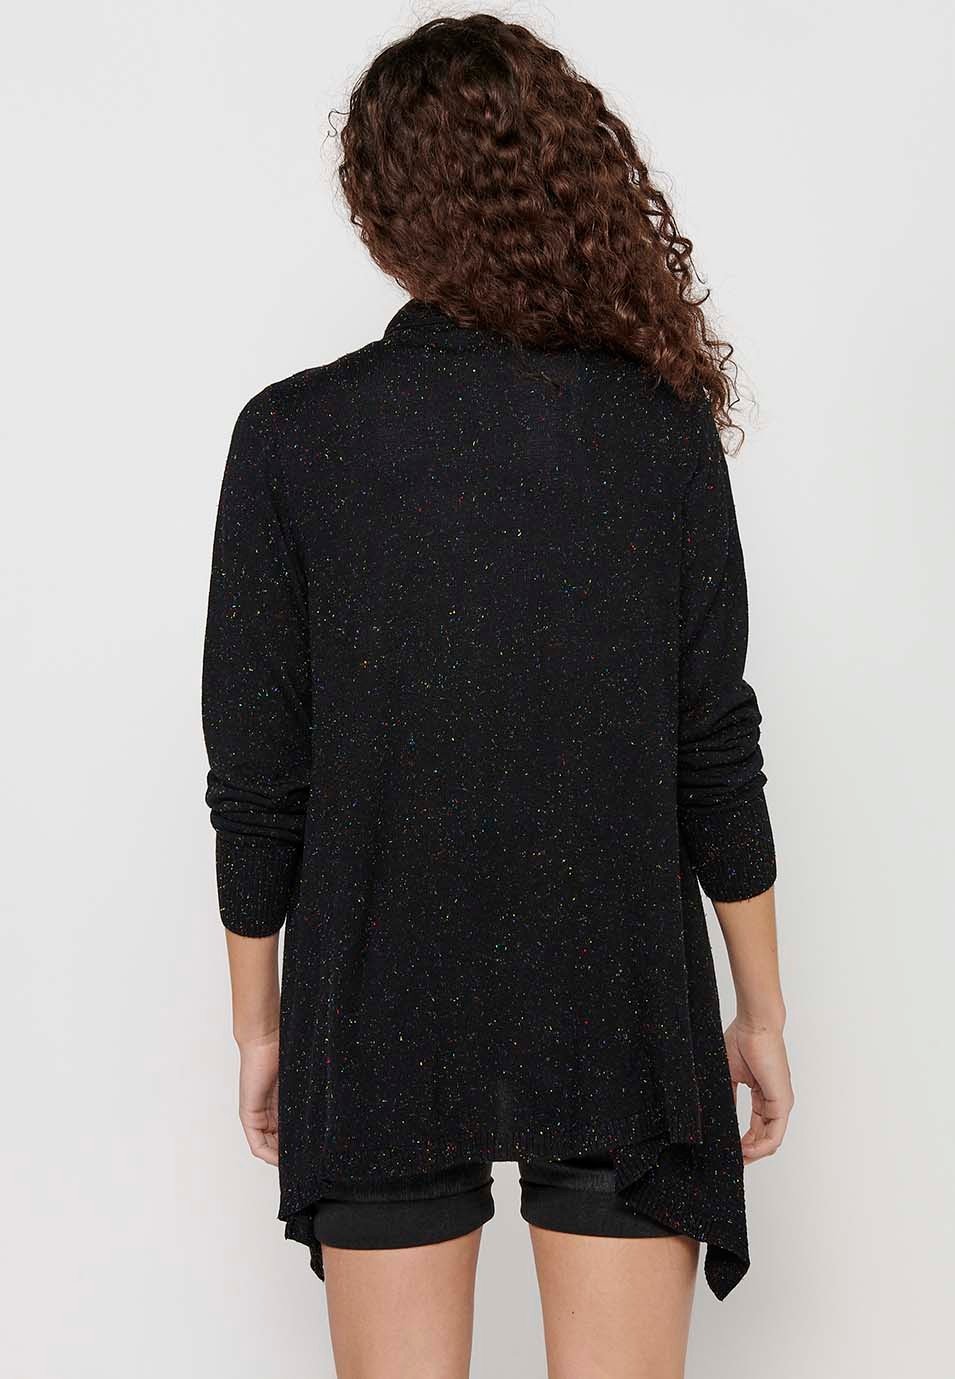 Long-sleeved tricot jacket with asymmetrical finish. Black Marbled Tricot for Women 8